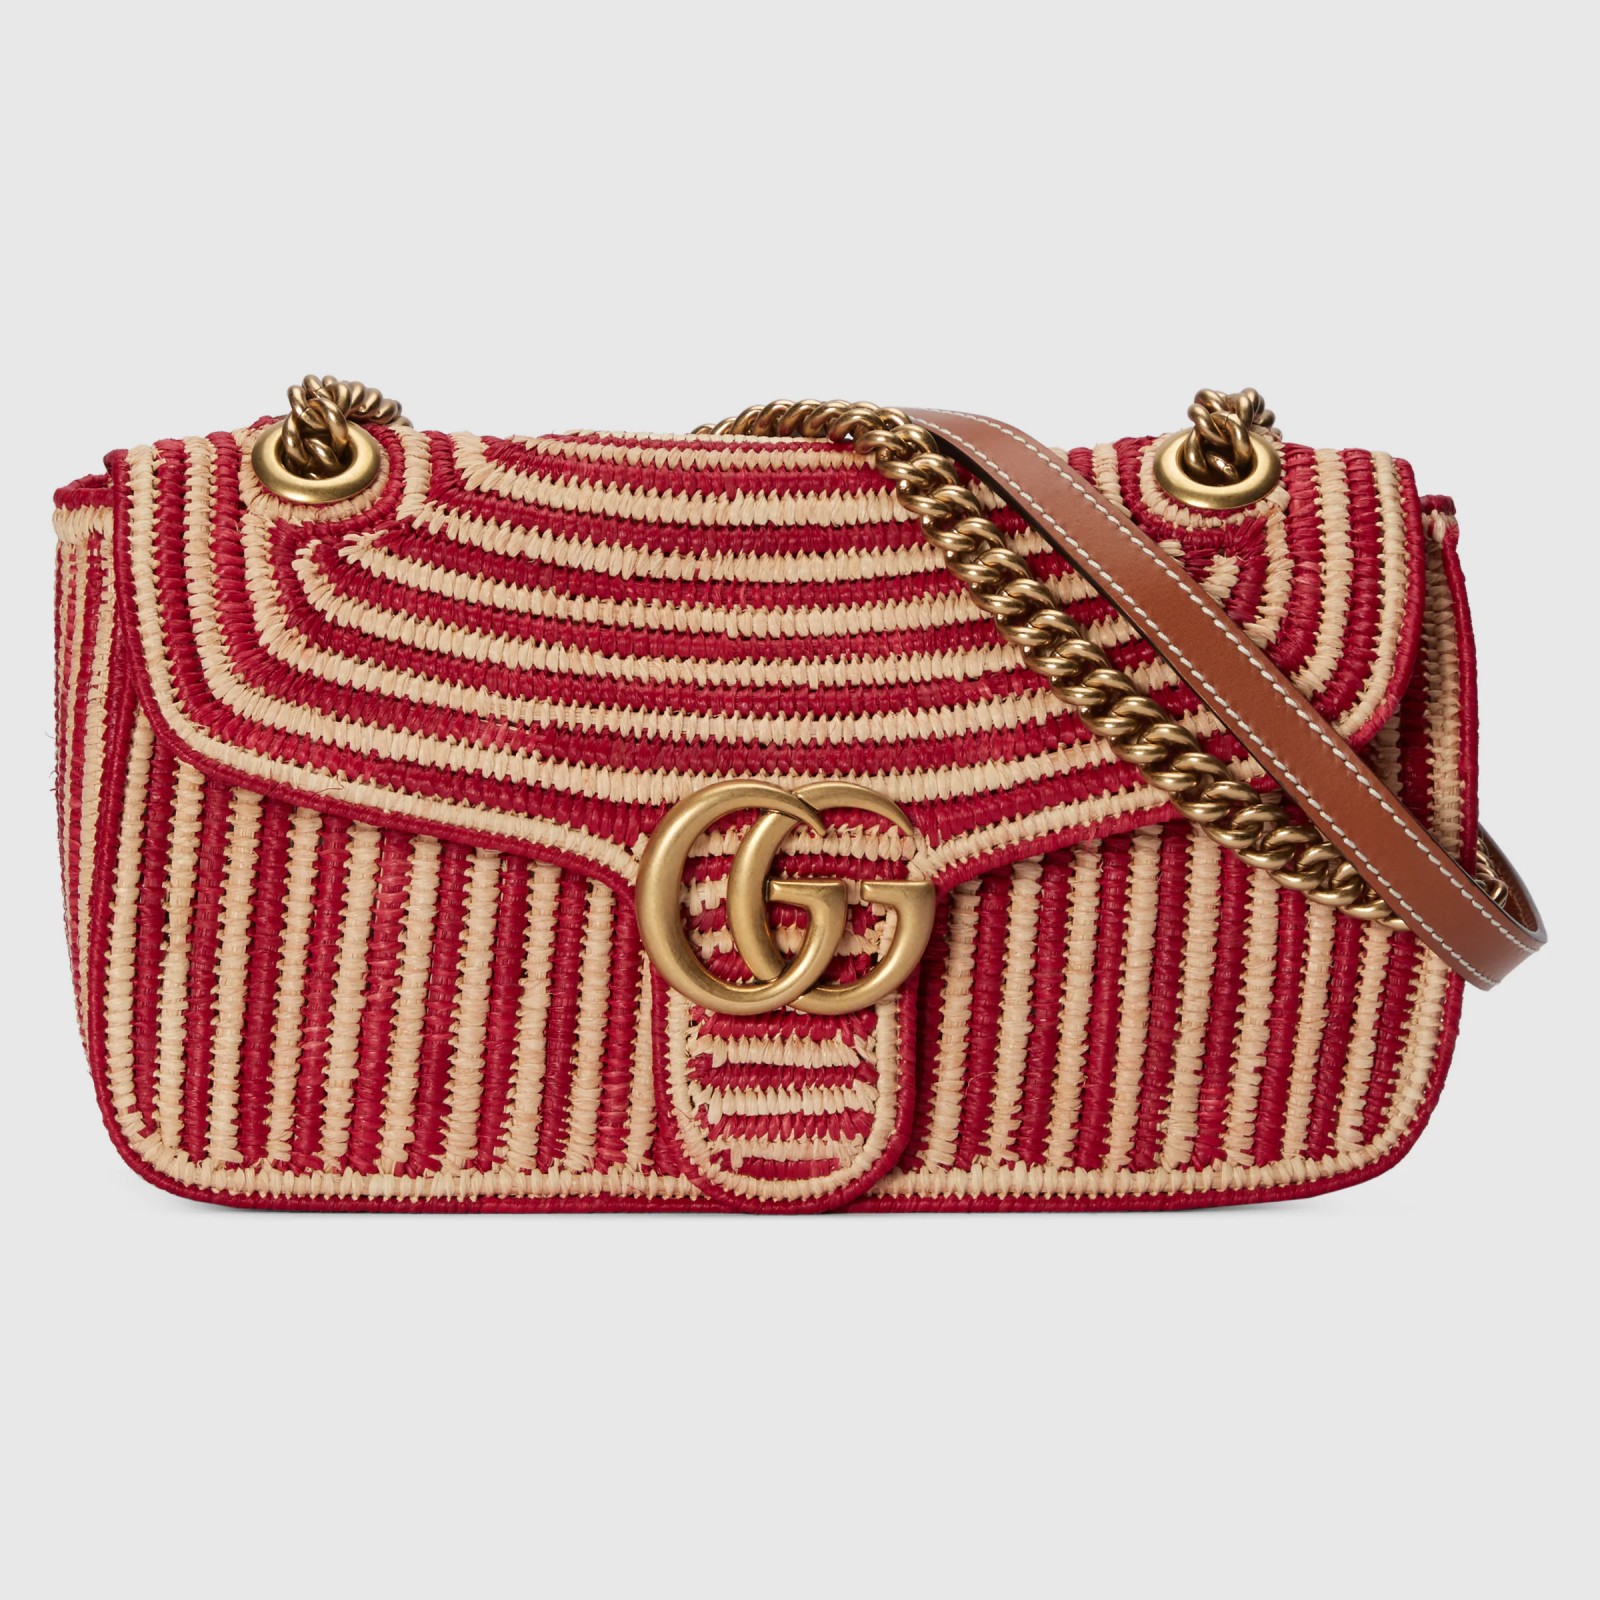 GG MARMONT SMALL SHOULDER BAG